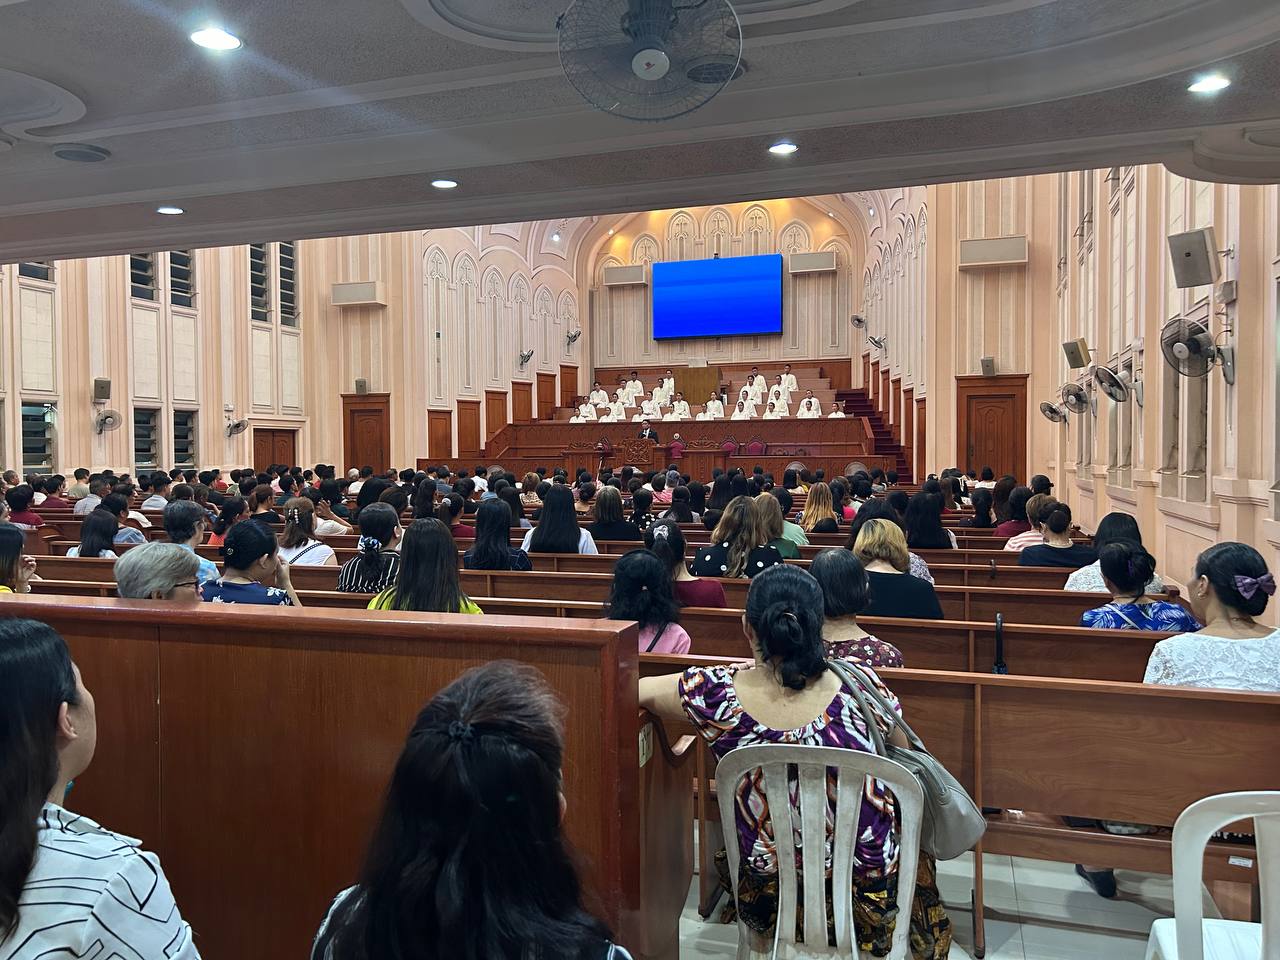 6 local congregations in Makati conduct evangelical missions